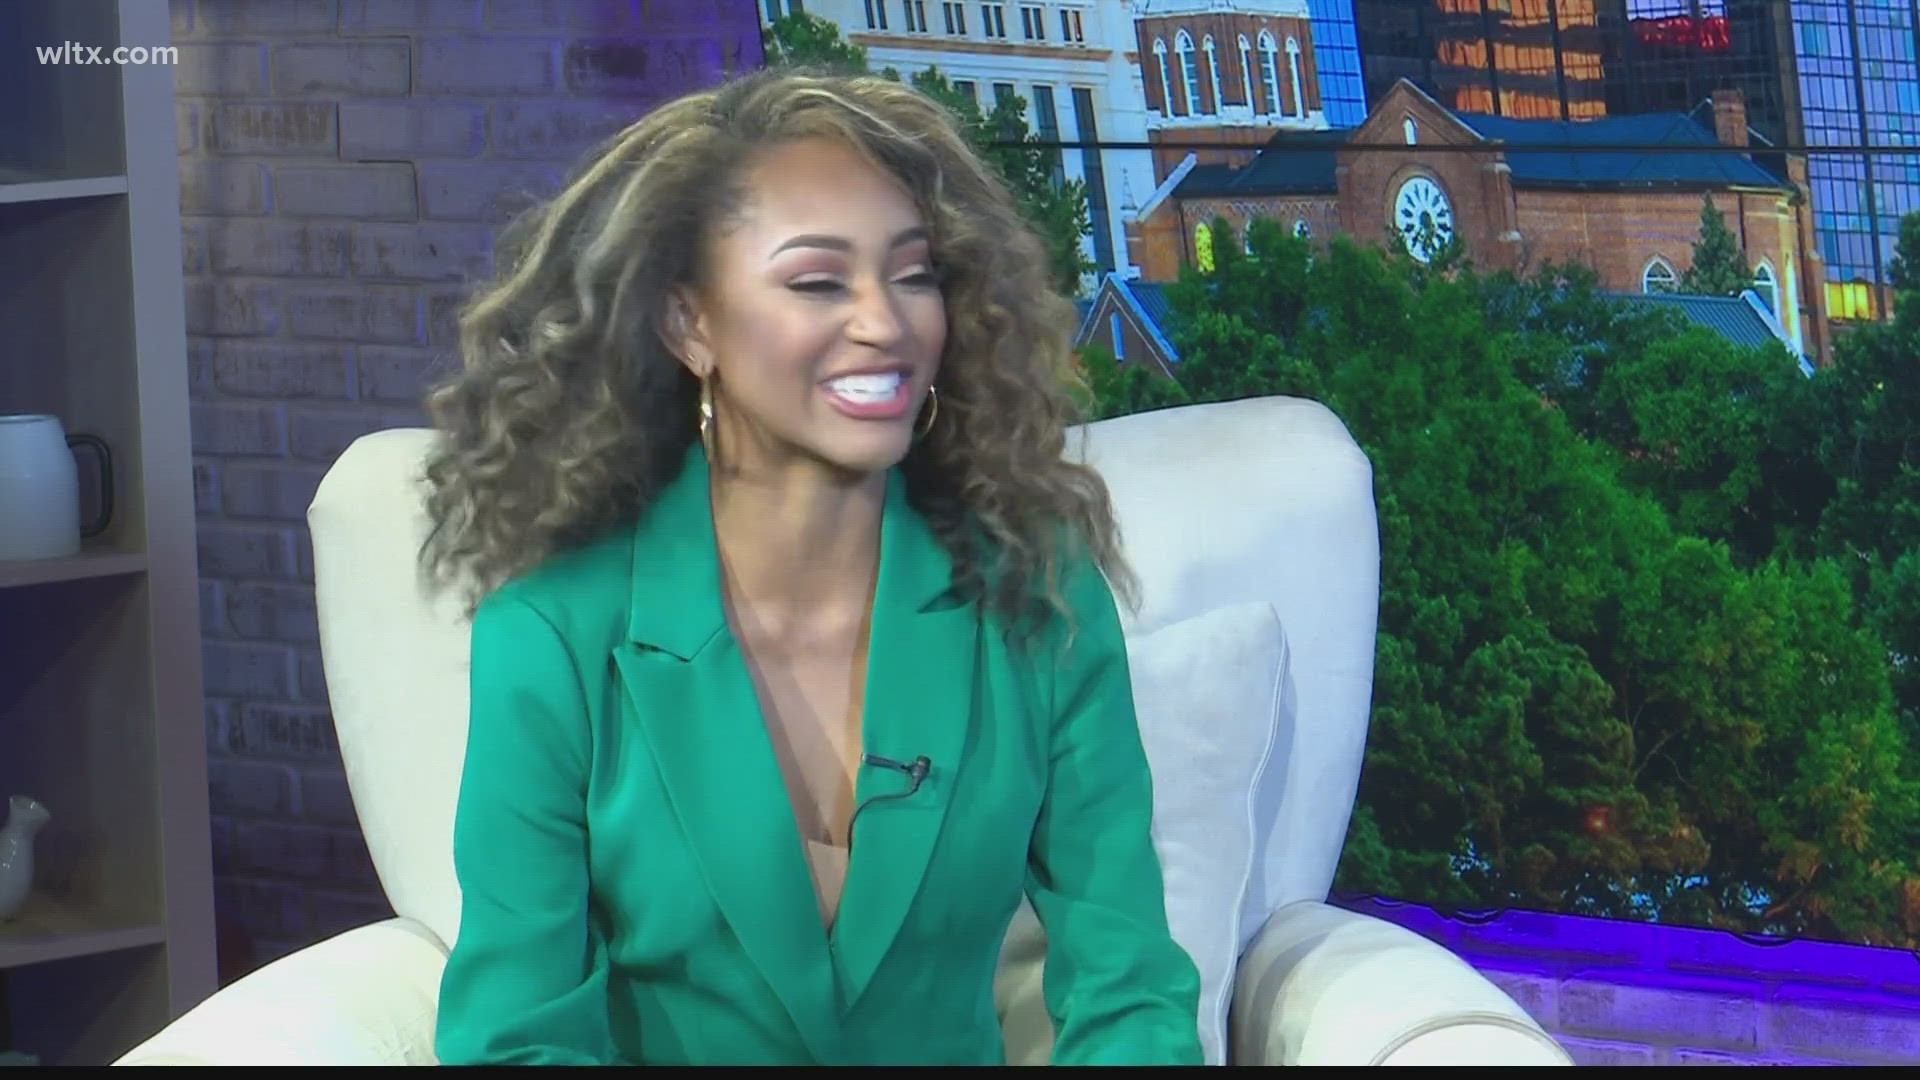 Jada Samuel will represent South Carolina at the Miss America pageant. She also has a special connection to WLTX.